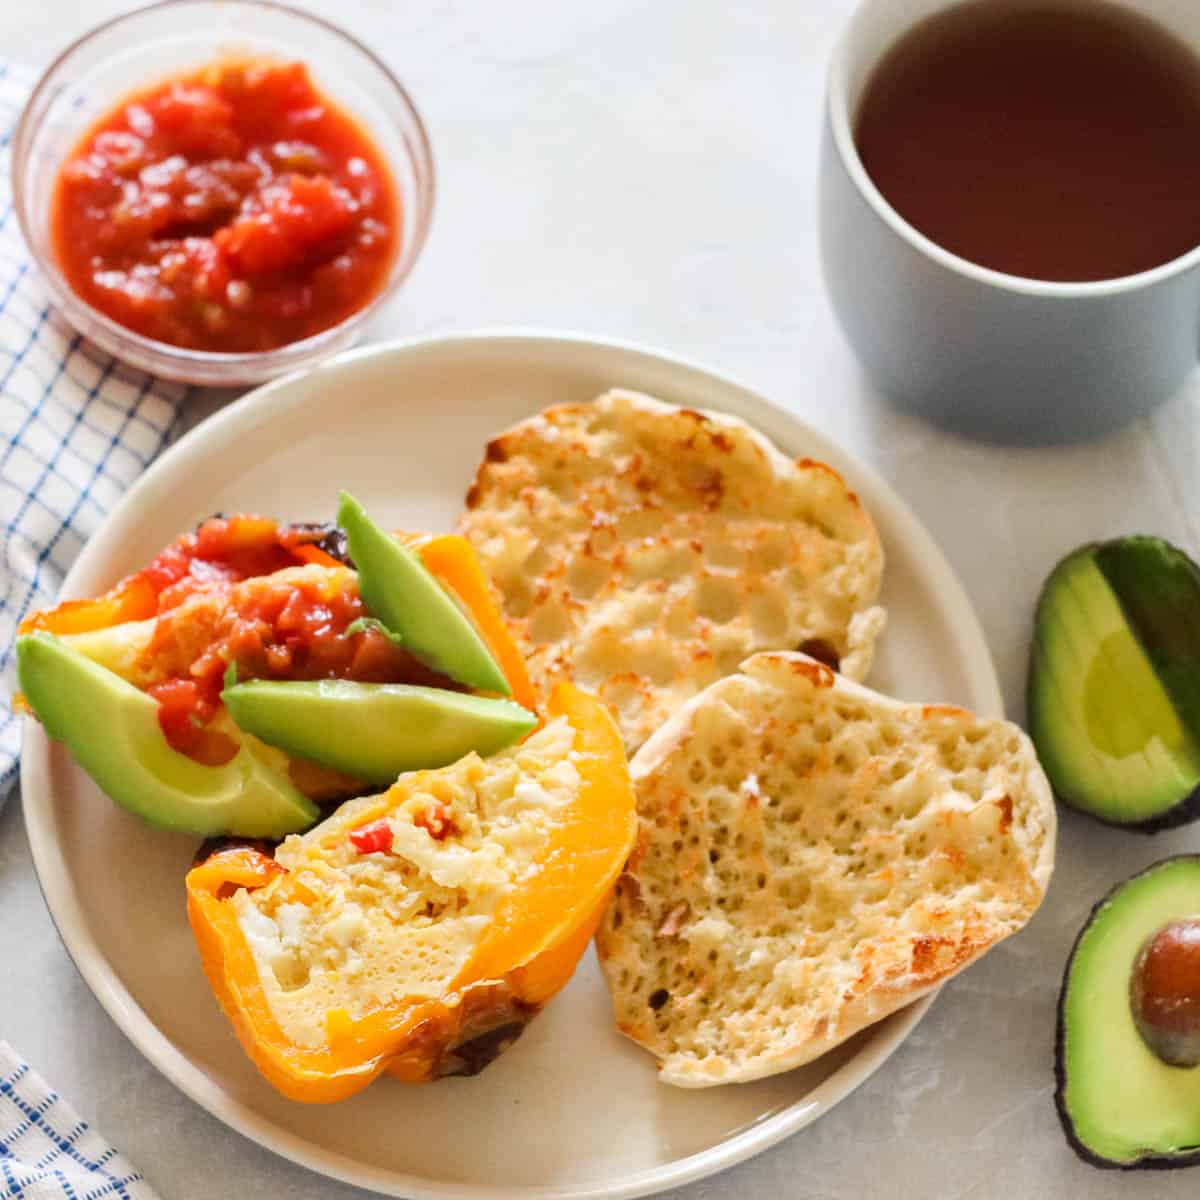 cut open egg stuffed bell pepper topped with salsa and avocado on a plate with an English muffin, next to a cut avocado, bowl of salsa, and cup of tea.